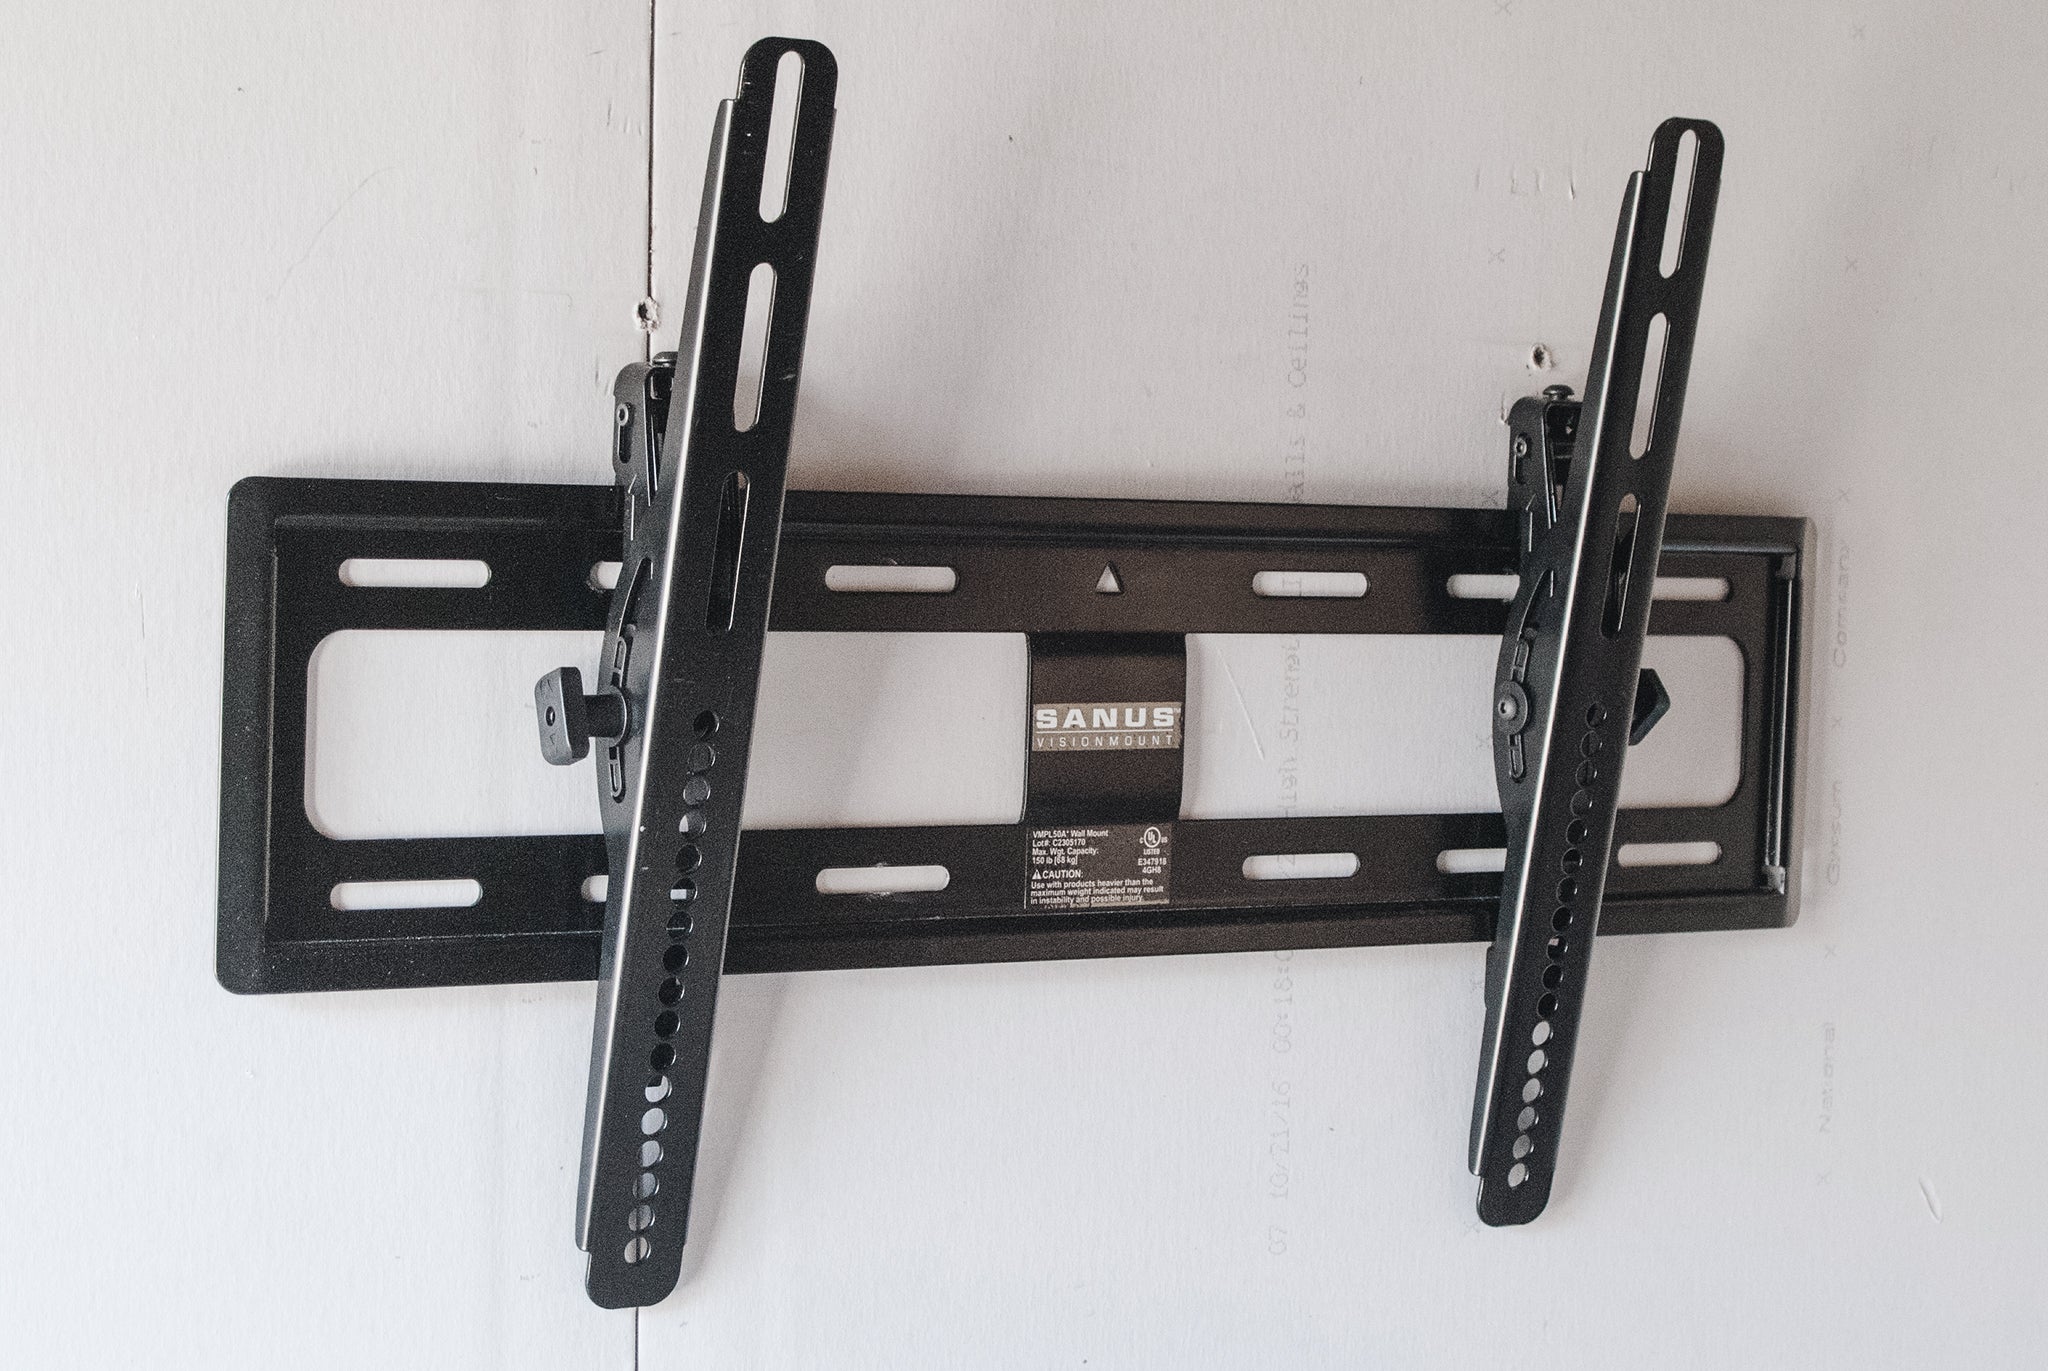 Are TV Wall Mounts Safe